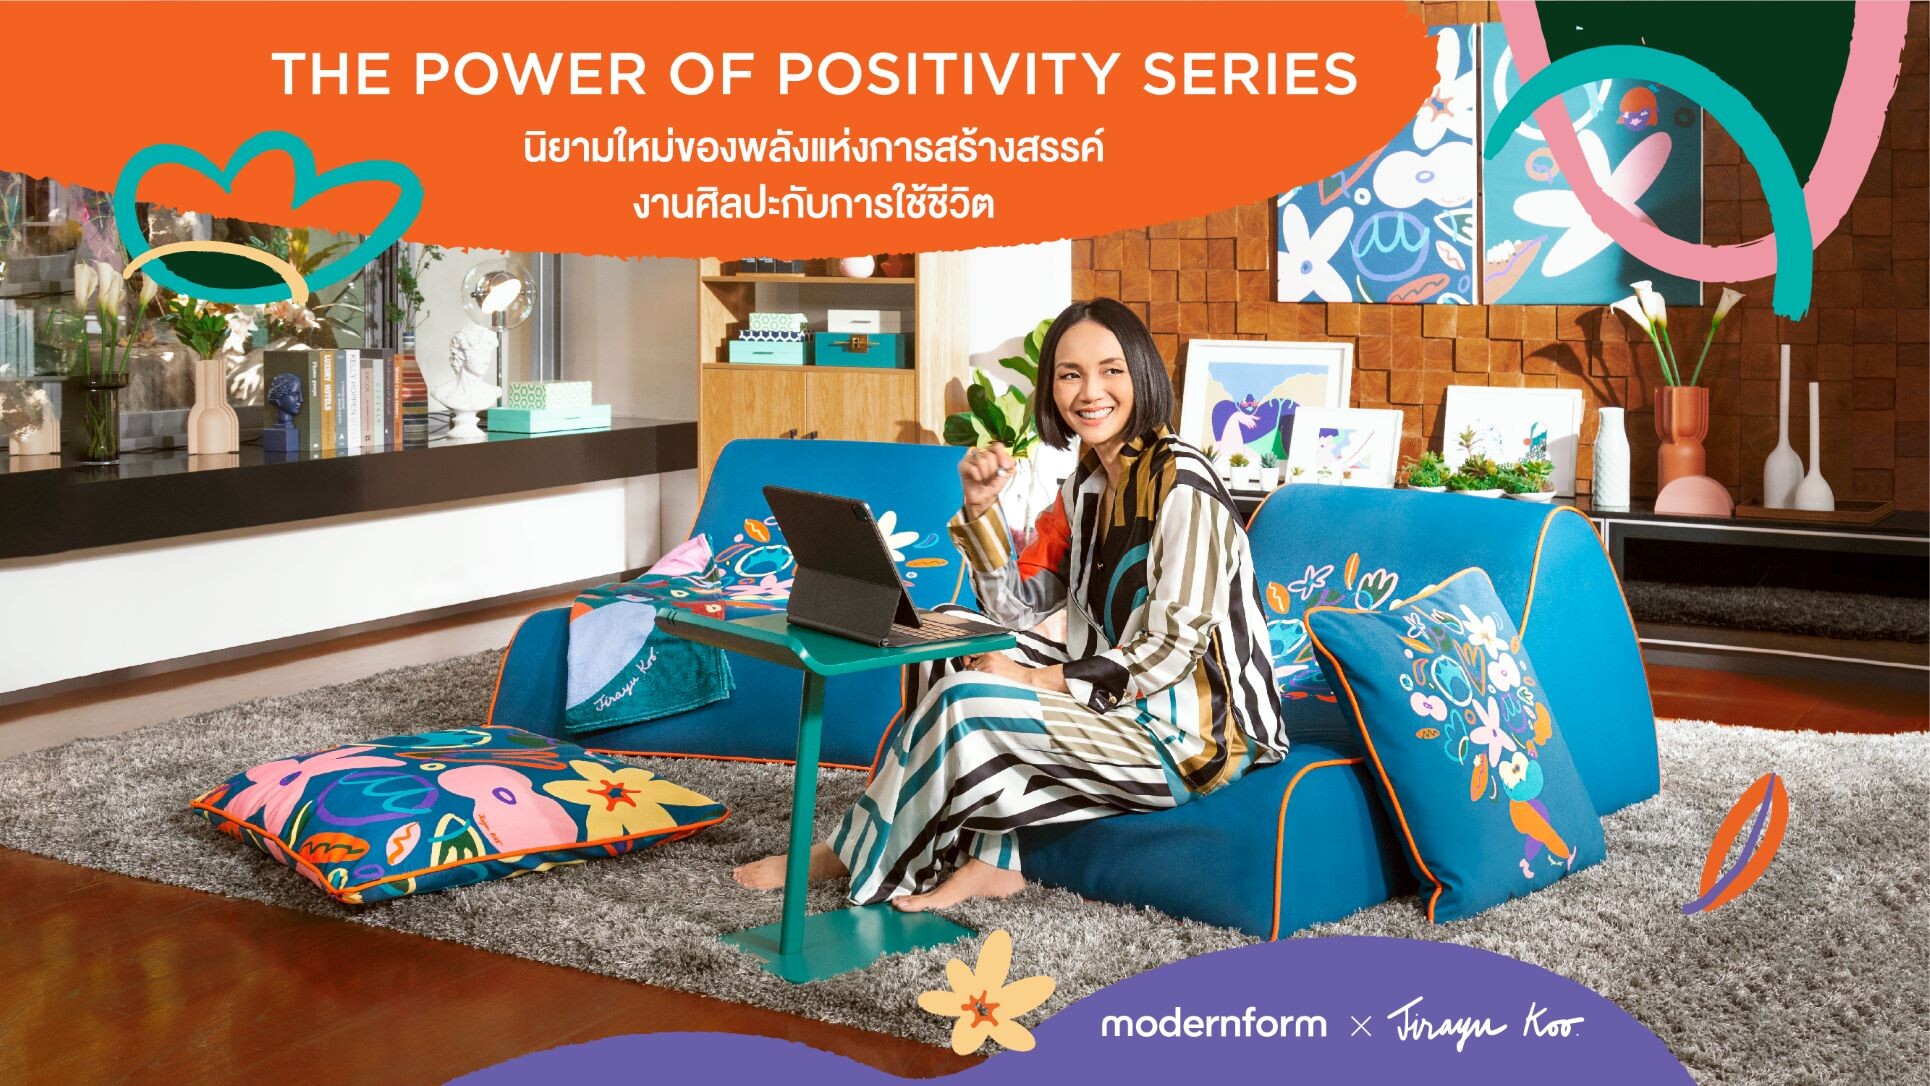 Modernform Collabs with Renowned Thai Illustrator Jirayu Koo  to Create "The Power of Positivity Series Collection"  to Welcome the Breezy and Bright Summer.